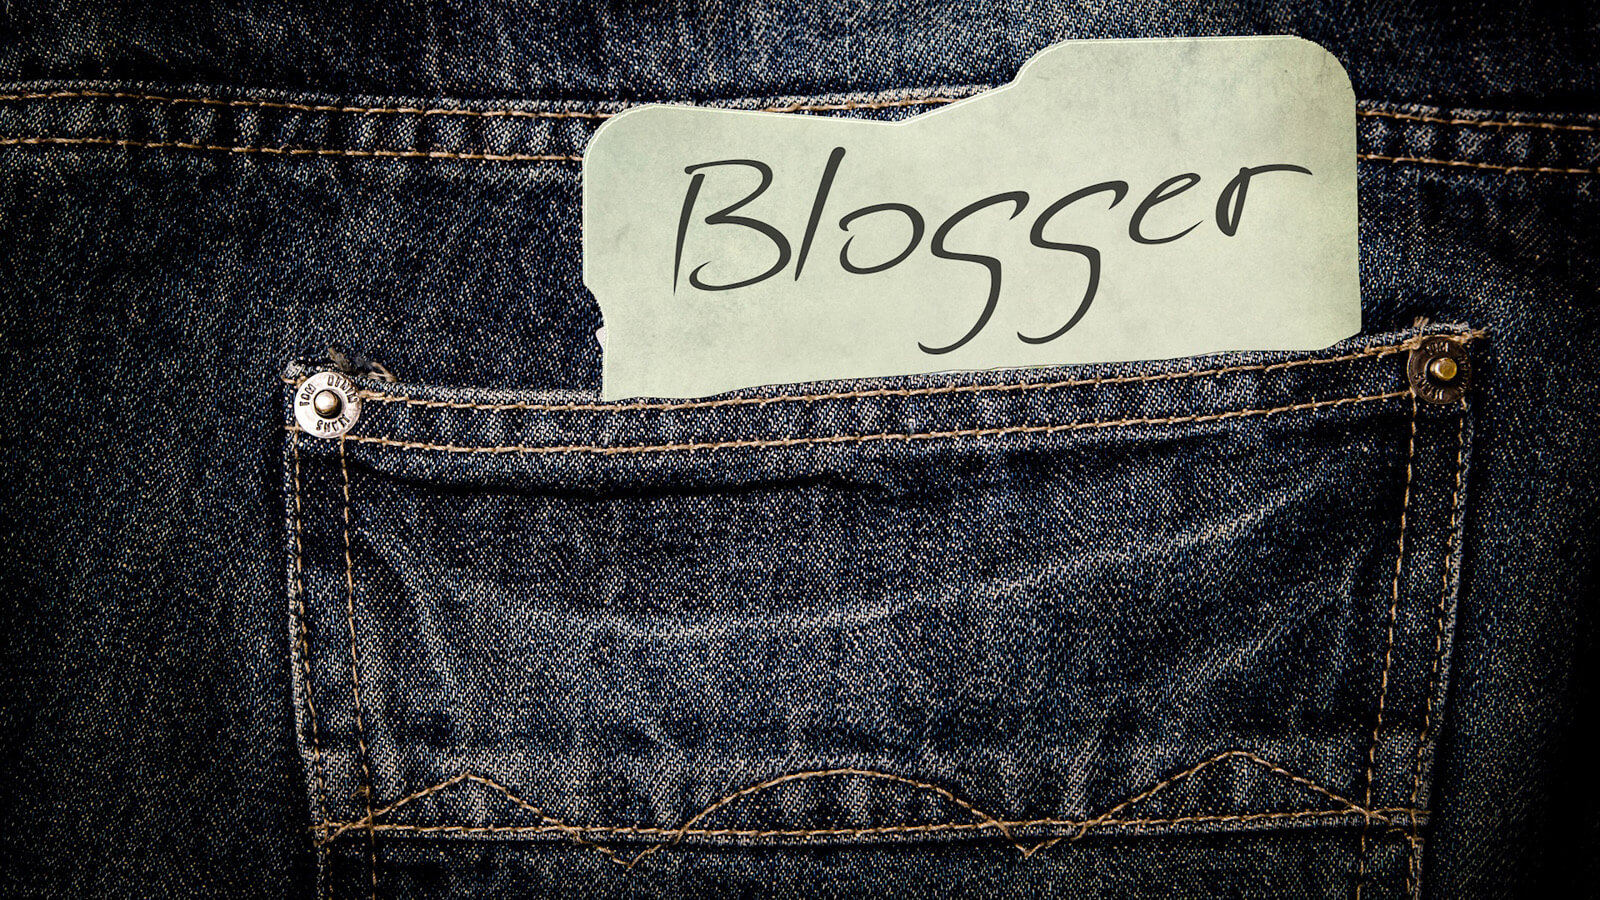 Be a blogger and do what you are passionate about.